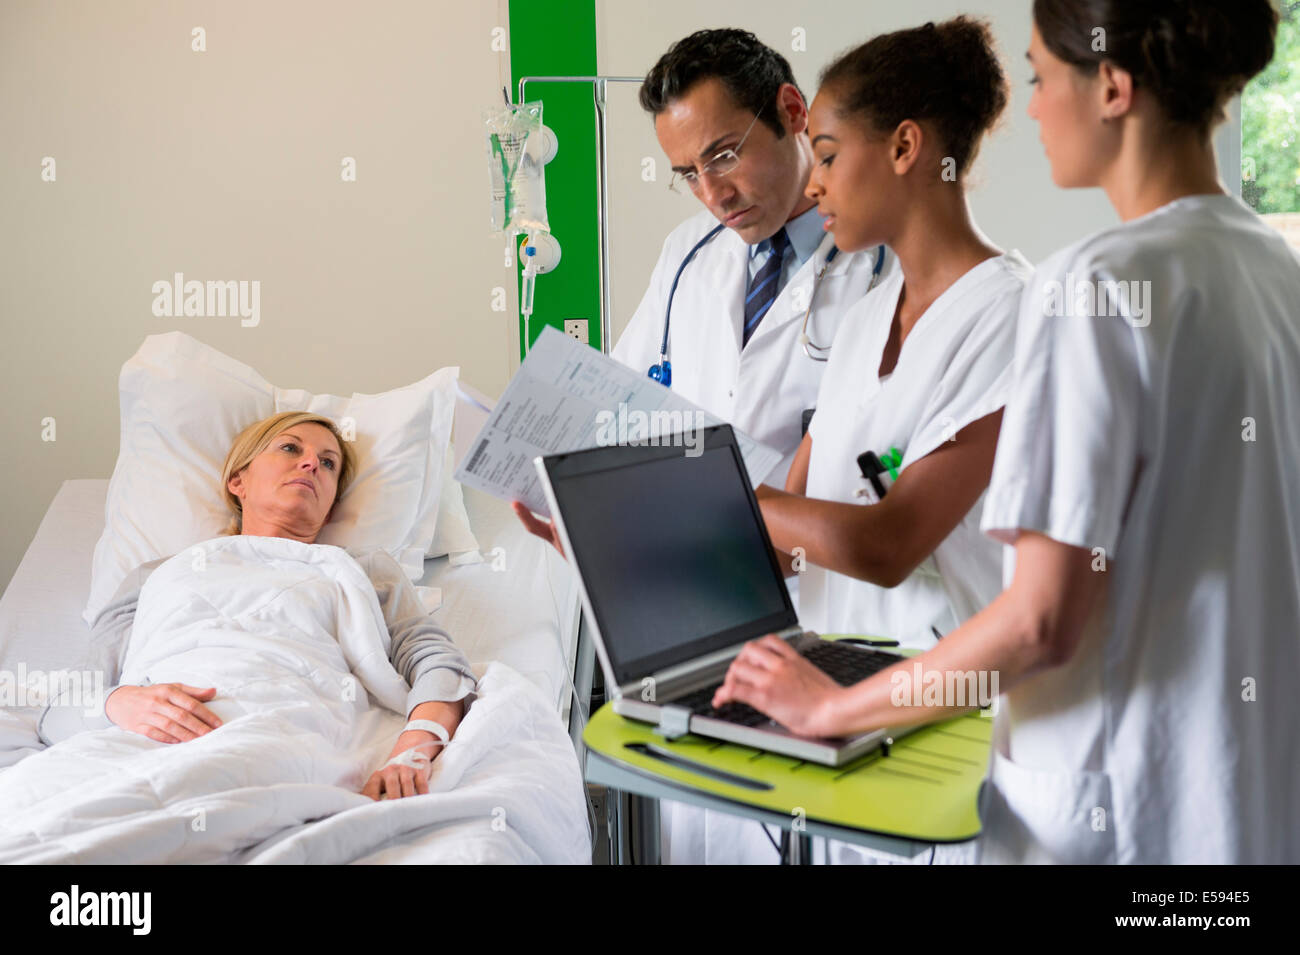 Medical team discussing female patient record on hospital bed Stock Photo